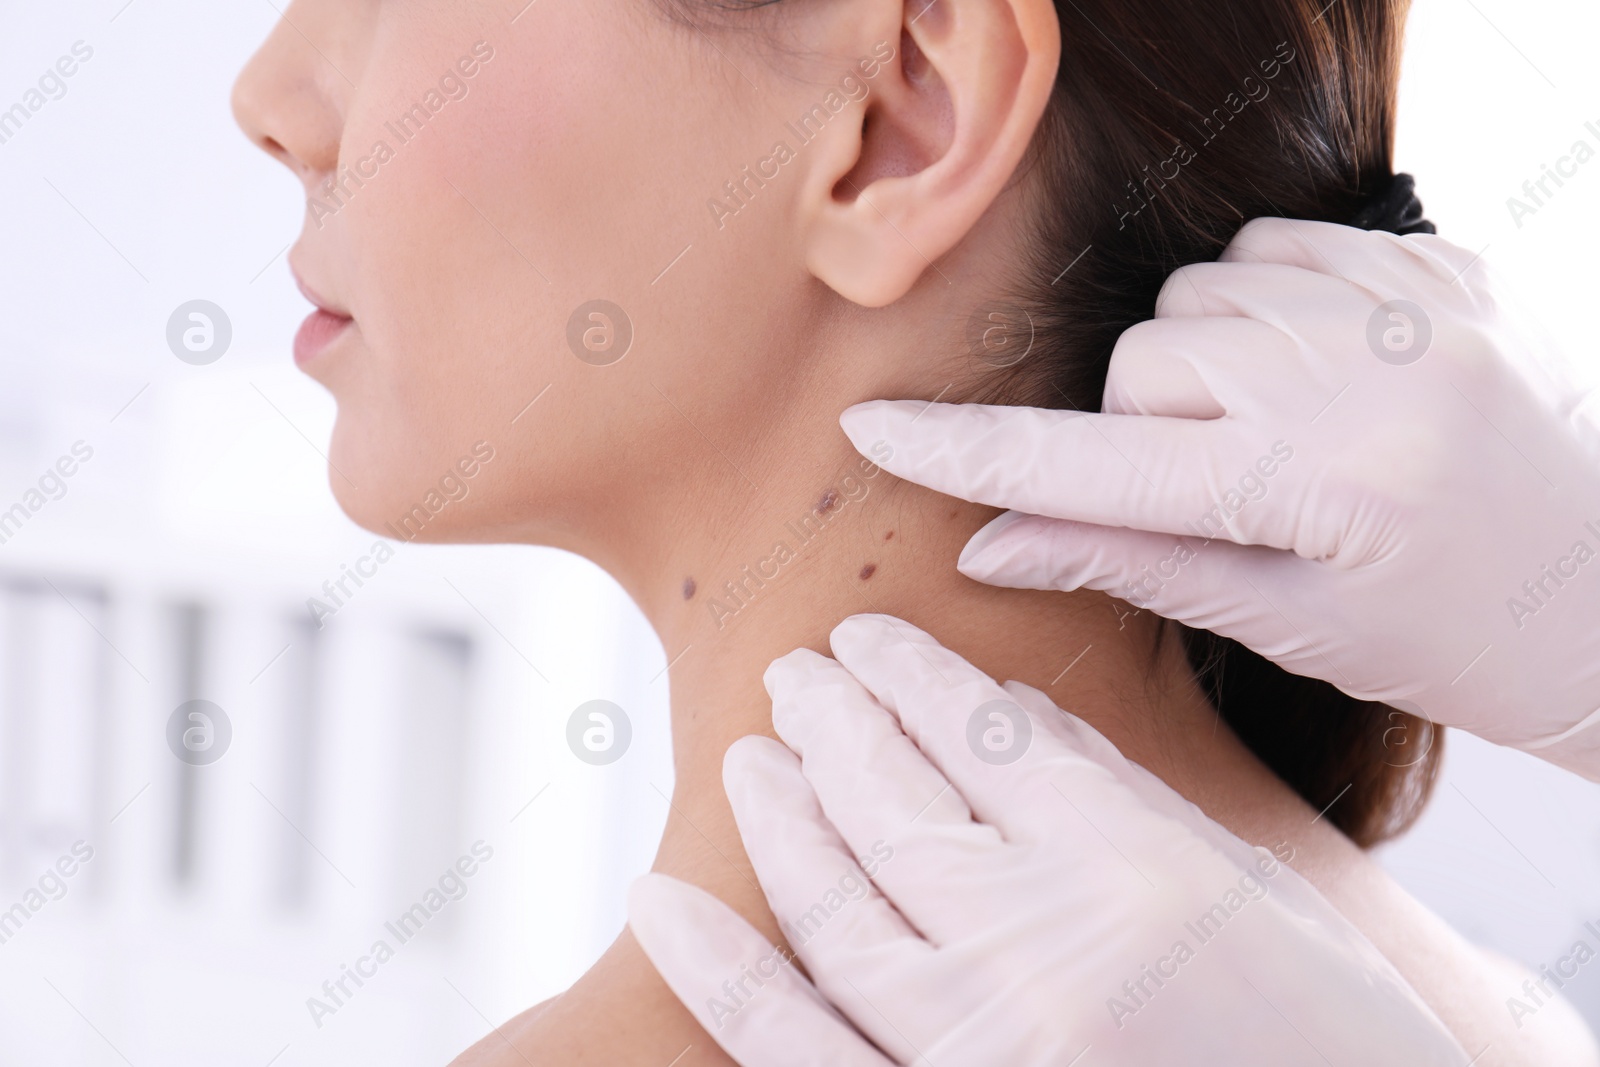 Photo of Dermatologist examining patient in clinic, closeup view